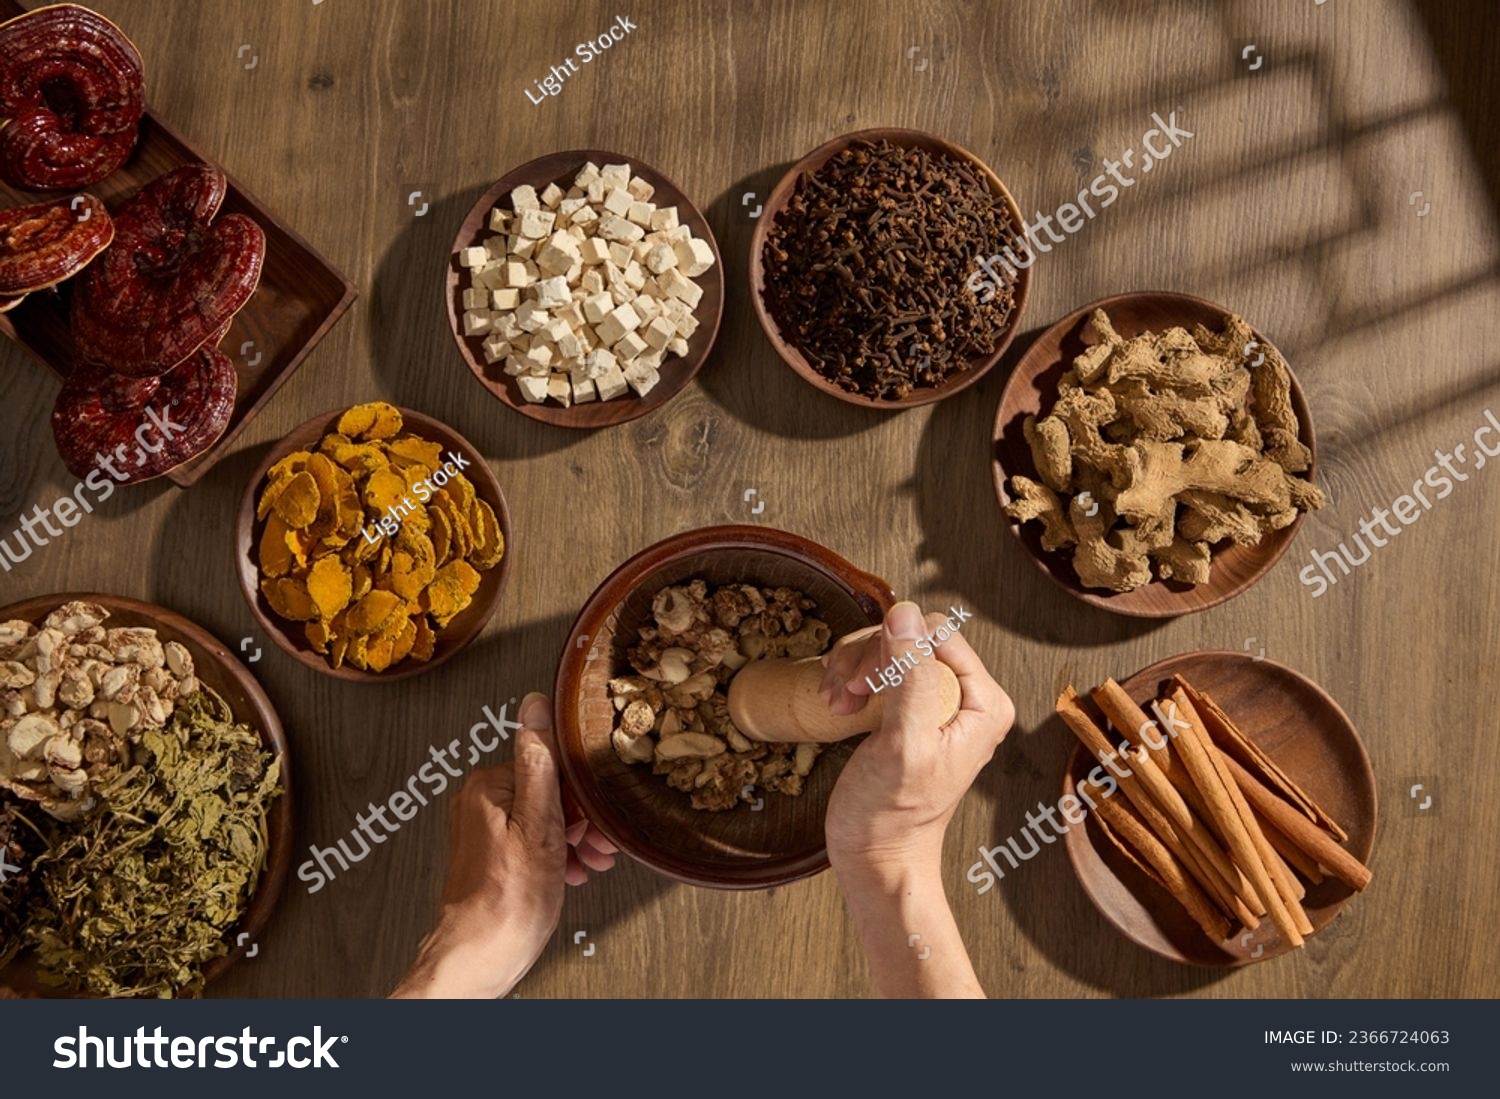 Scene of traditional medicines on wooden trays, decorated on vintage table background with window shadow. Top view, the apothecary's hand is pounding medicine in a wooden mortar #2366724063